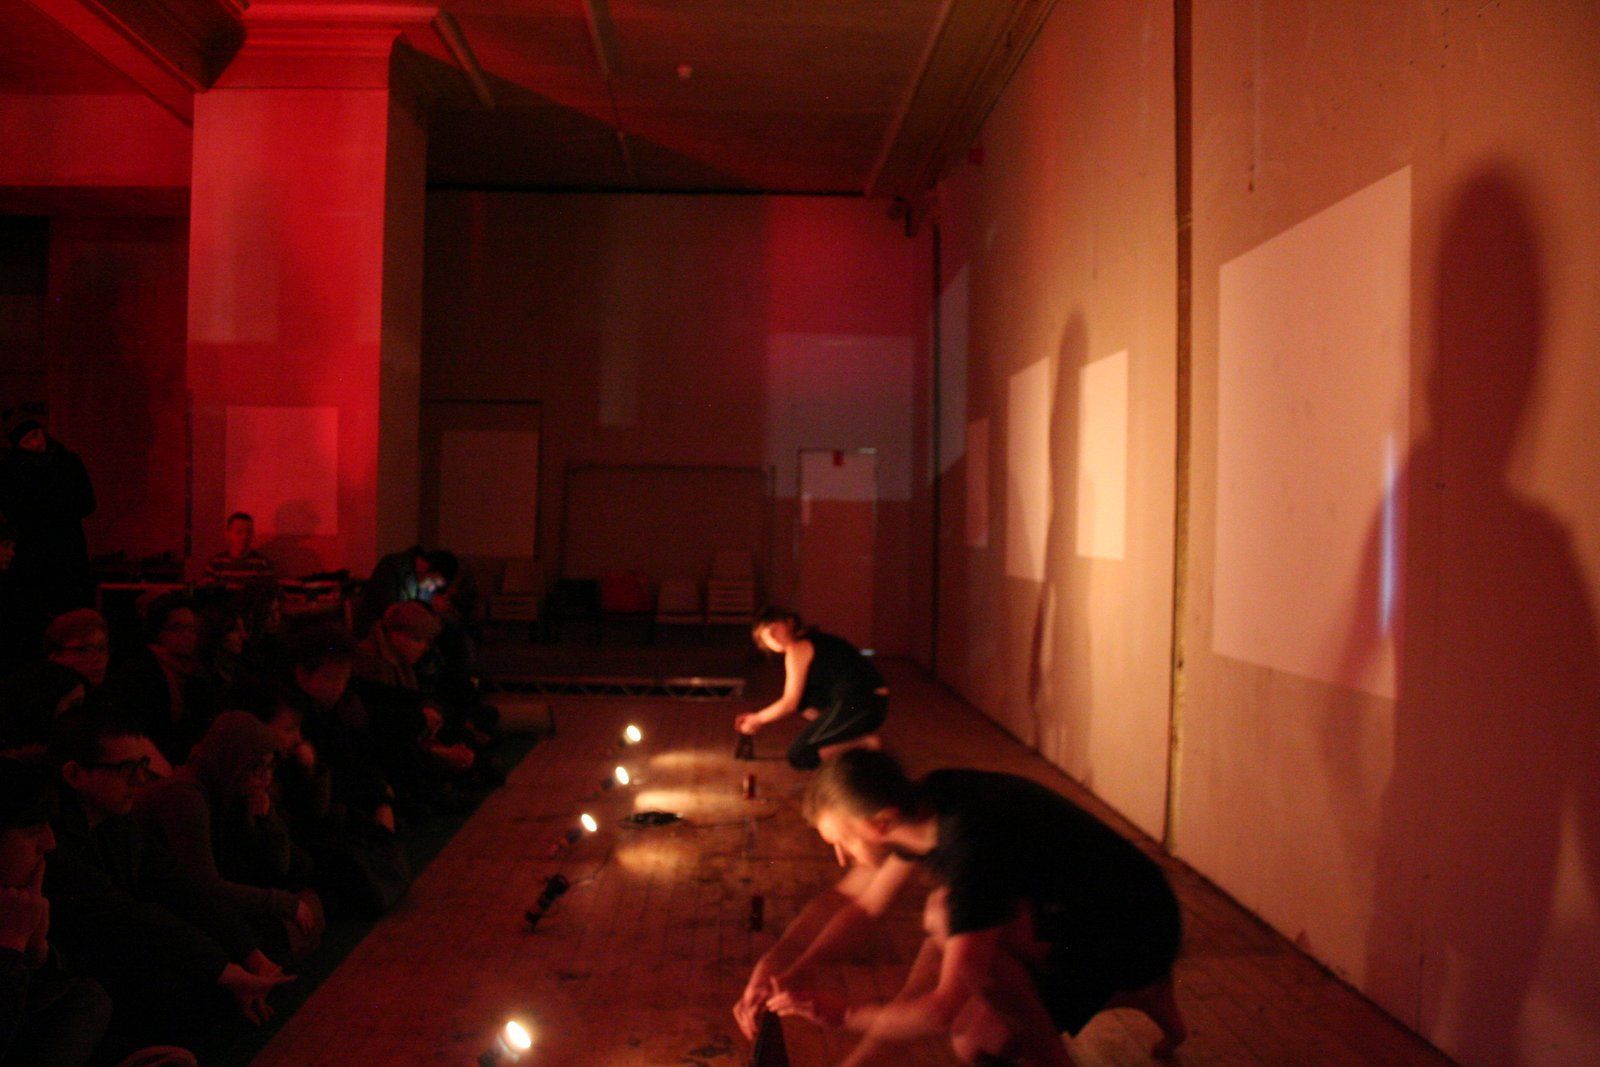 a group of people are kneeling down in a dark room with candles on the floor .